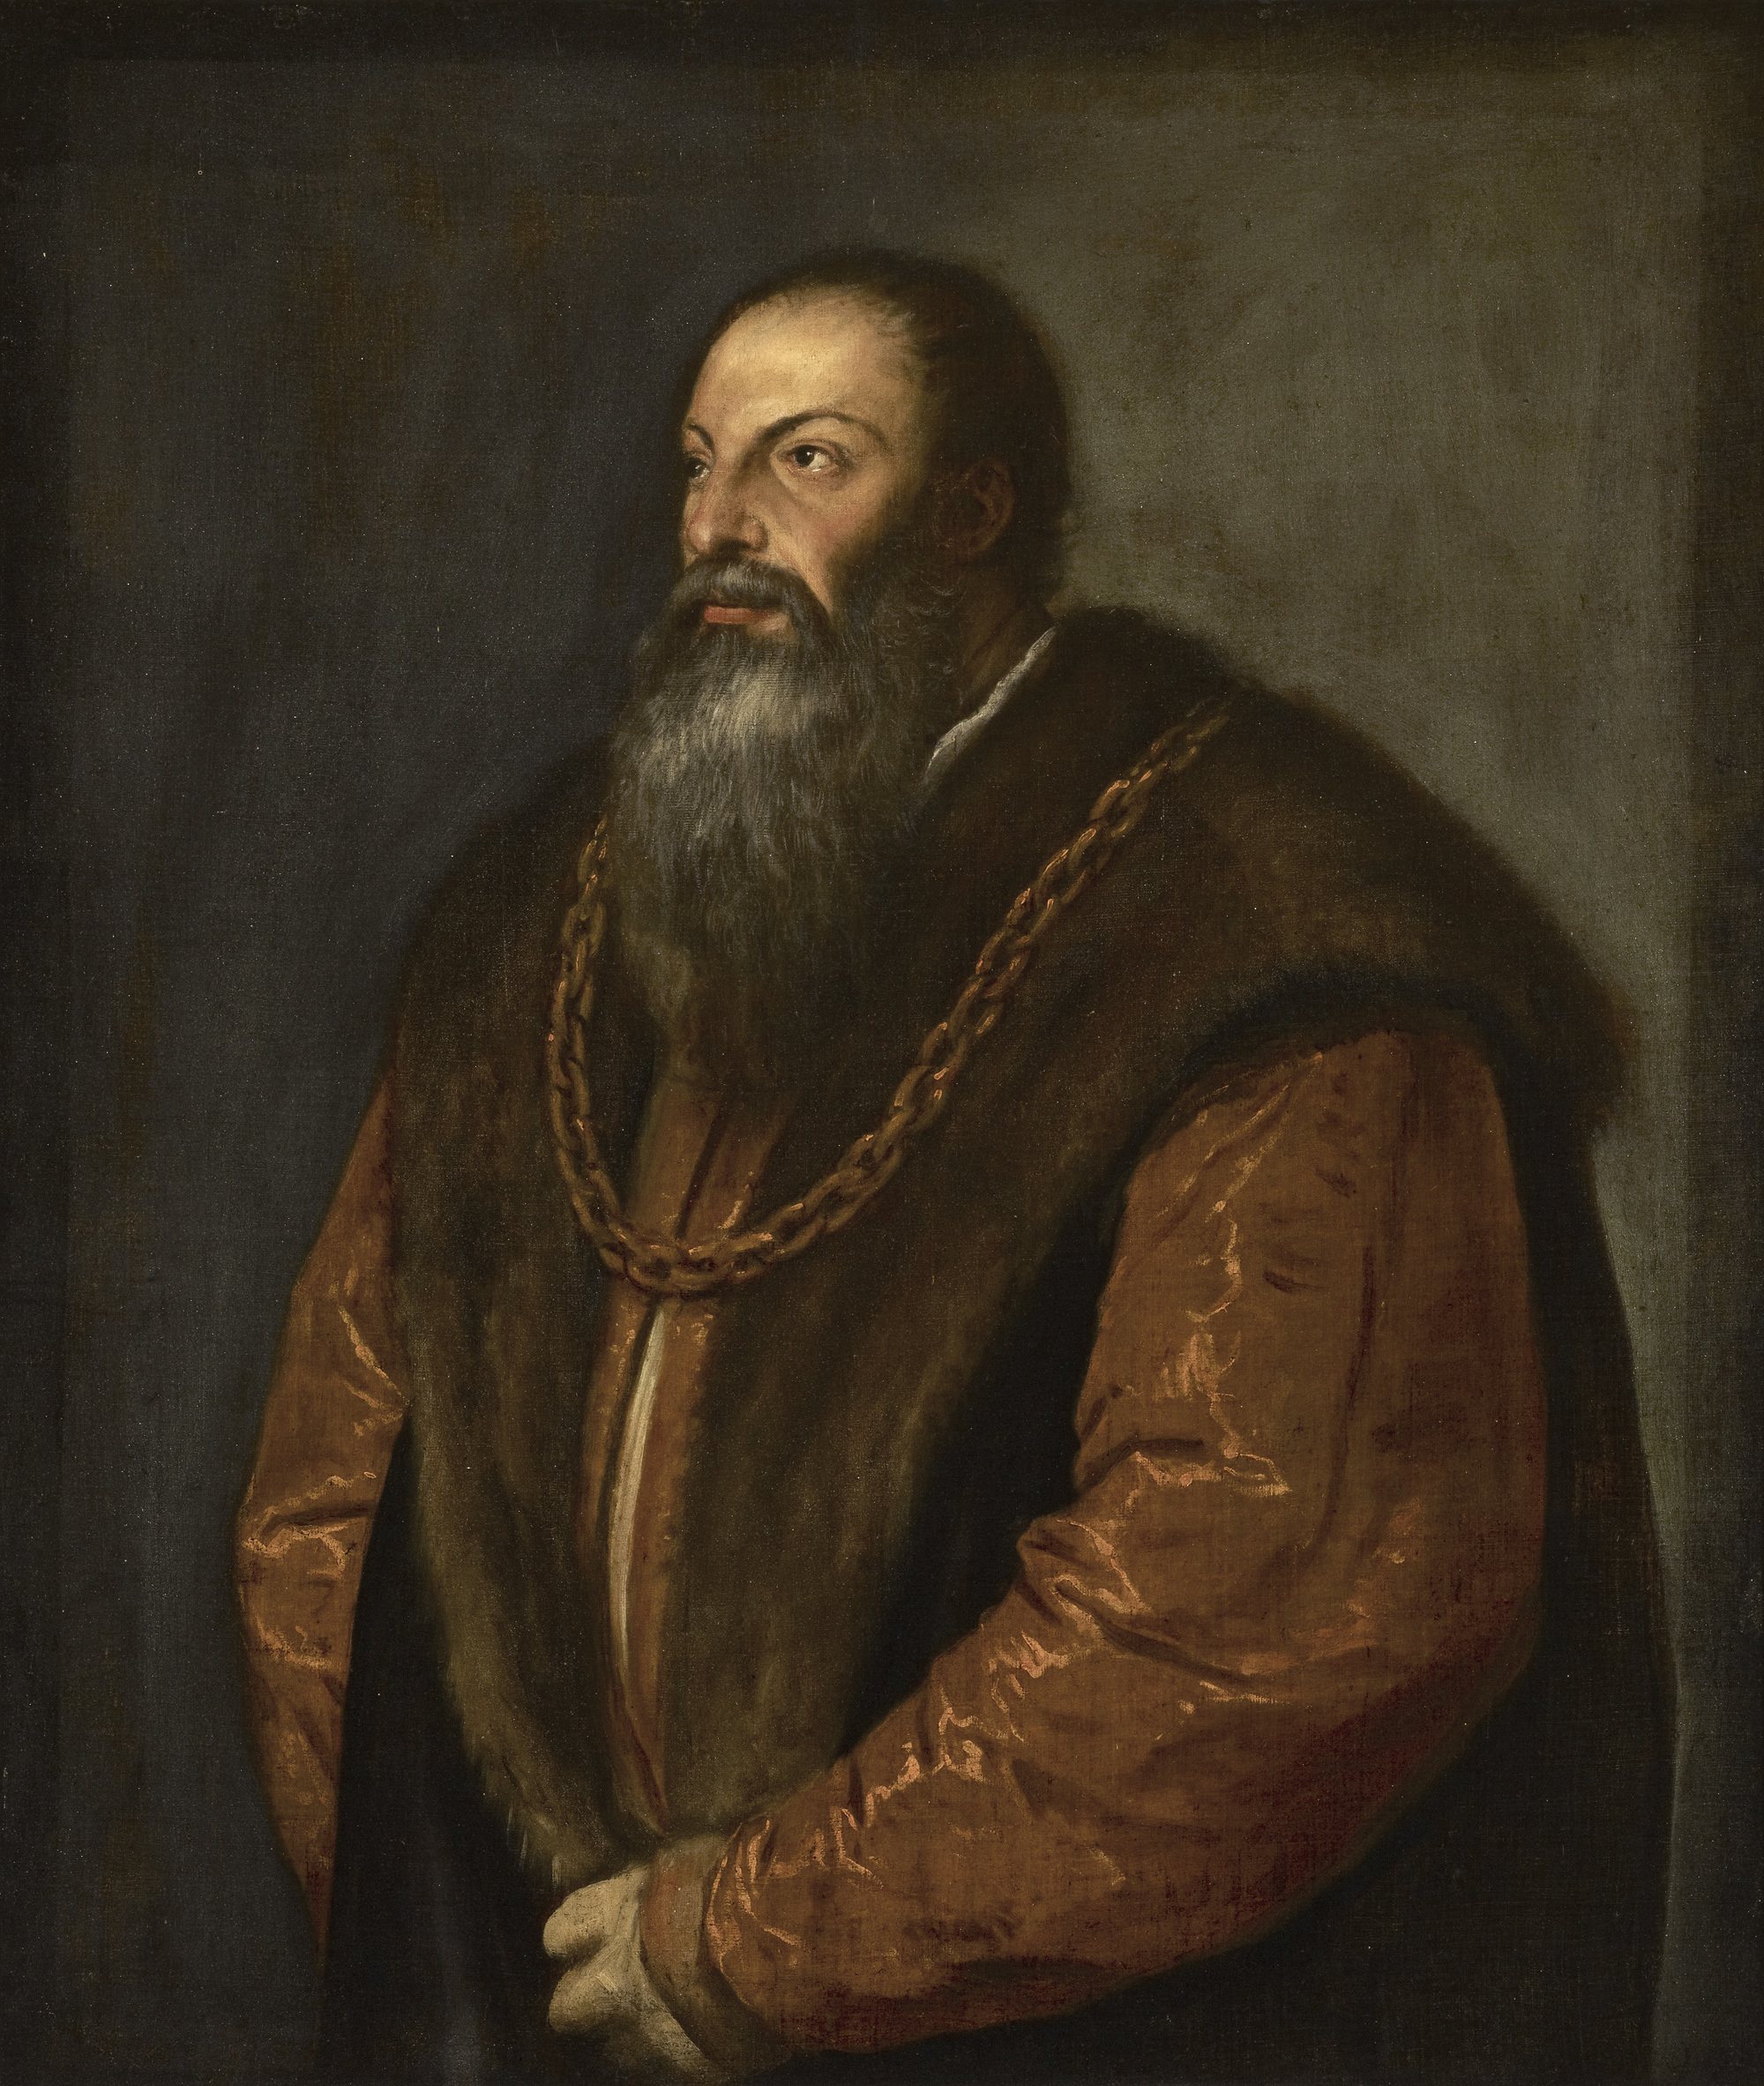 Pietro Aretino by  Titian - ca. 1537 - 101.9 × 85.7 cm The Frick Collection